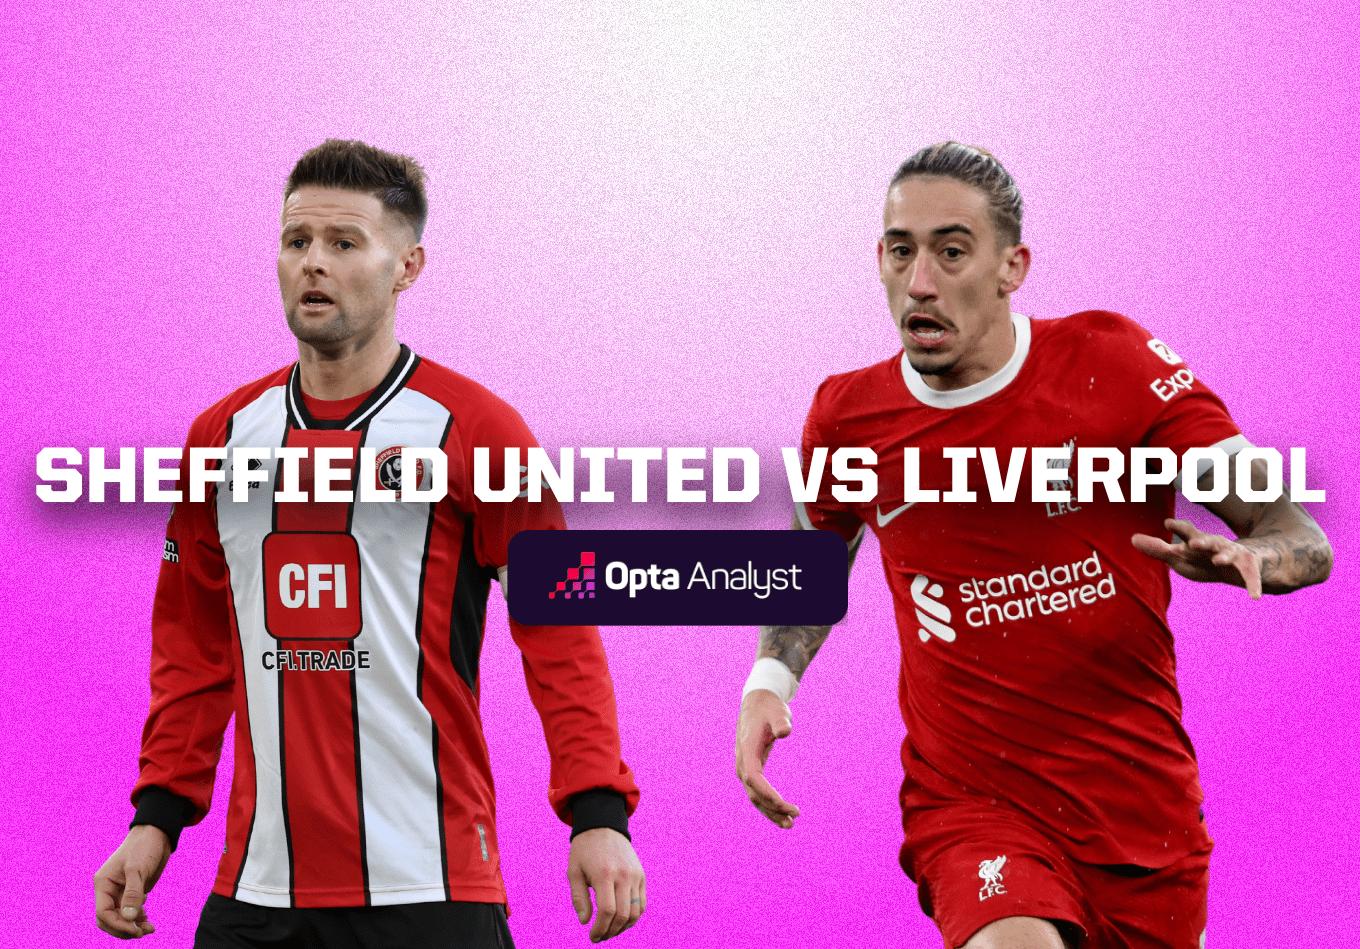 Sheffield United vs Liverpool: Prediction and Preview